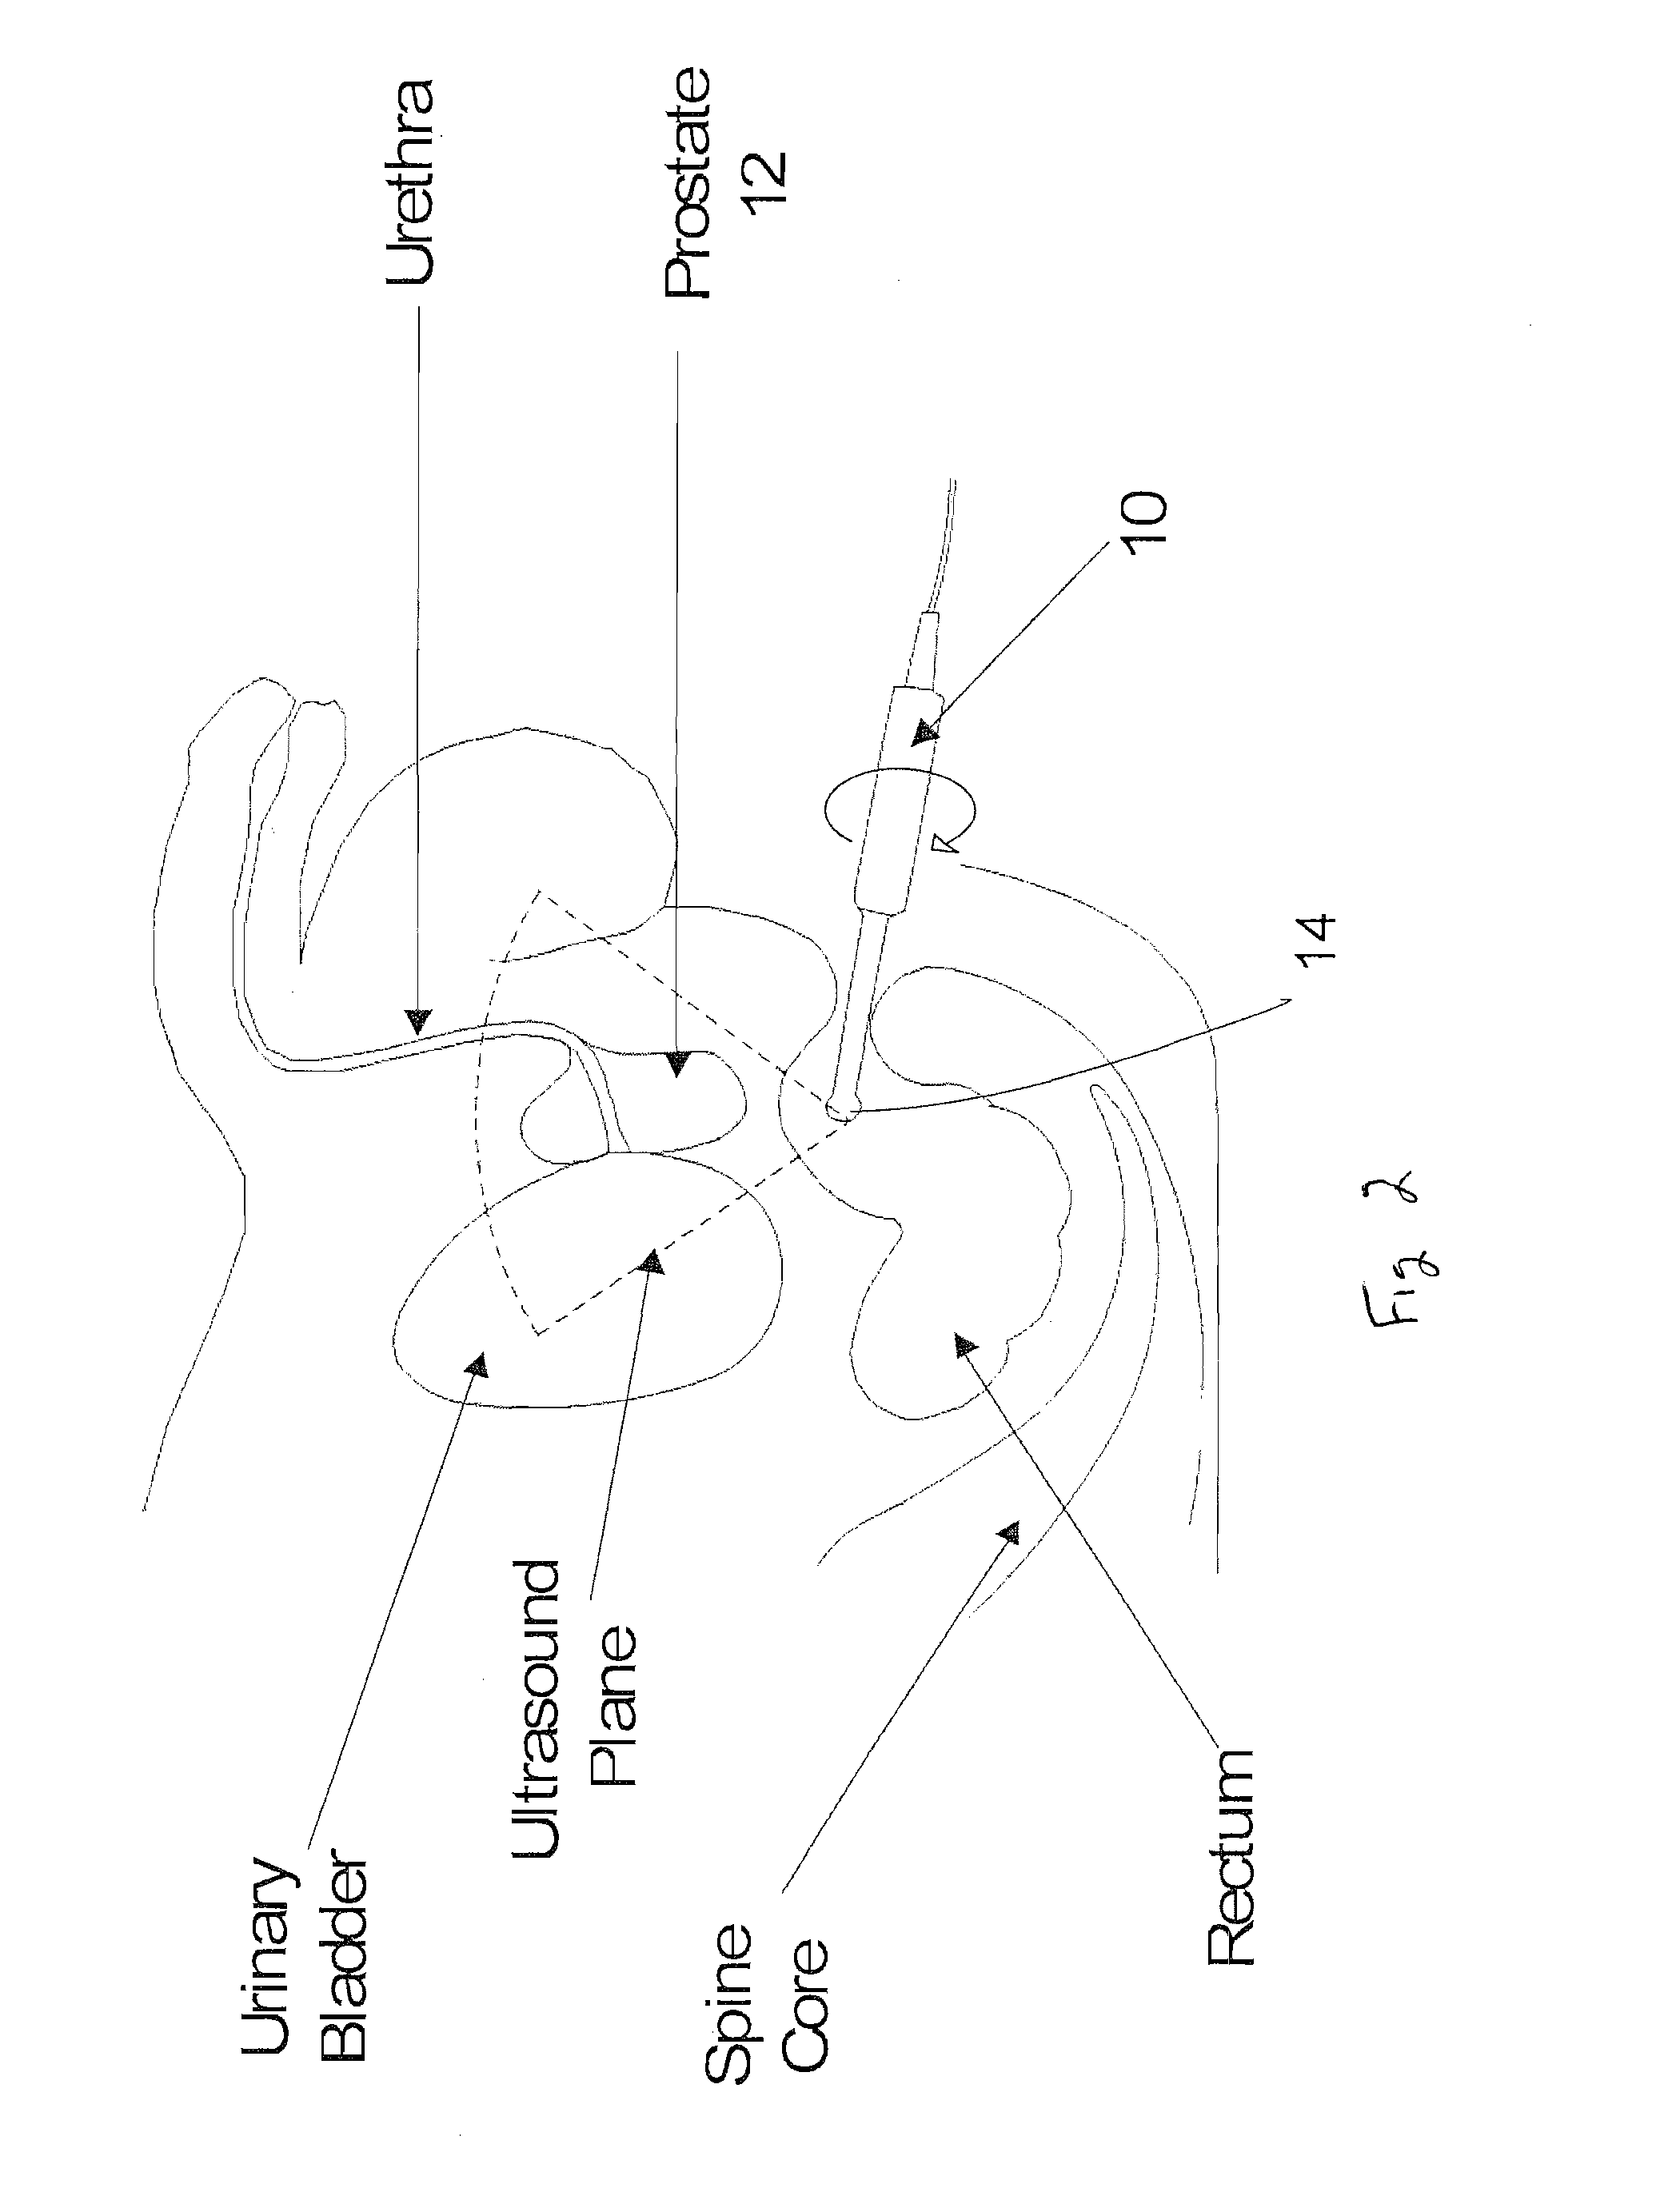 System and method for 3-d biopsy